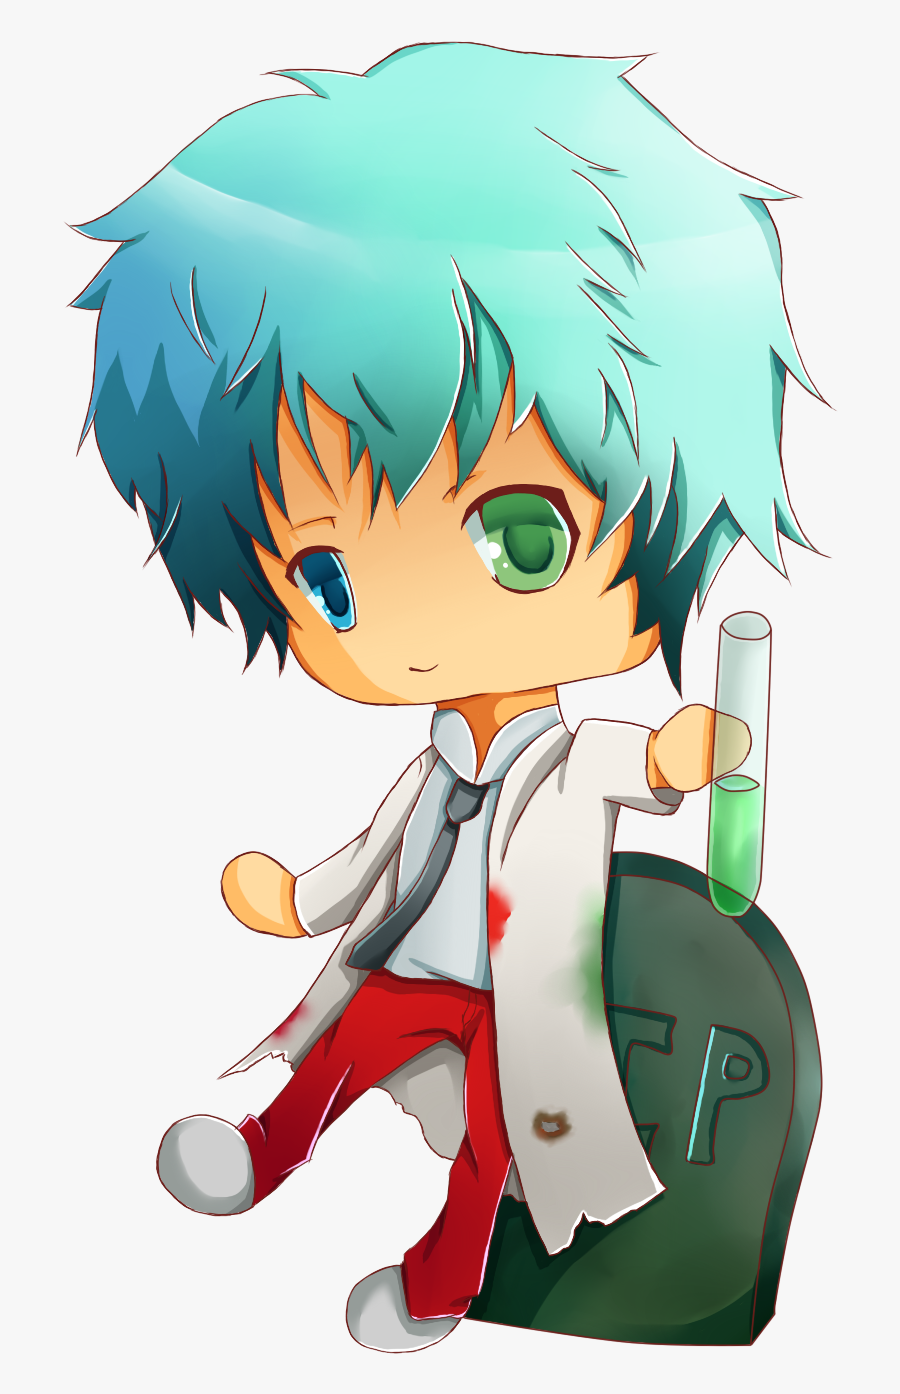 Verdant Is Known As The “vampire Robot”, So I Gave - Anime Chibi Scientist Png, Transparent Clipart